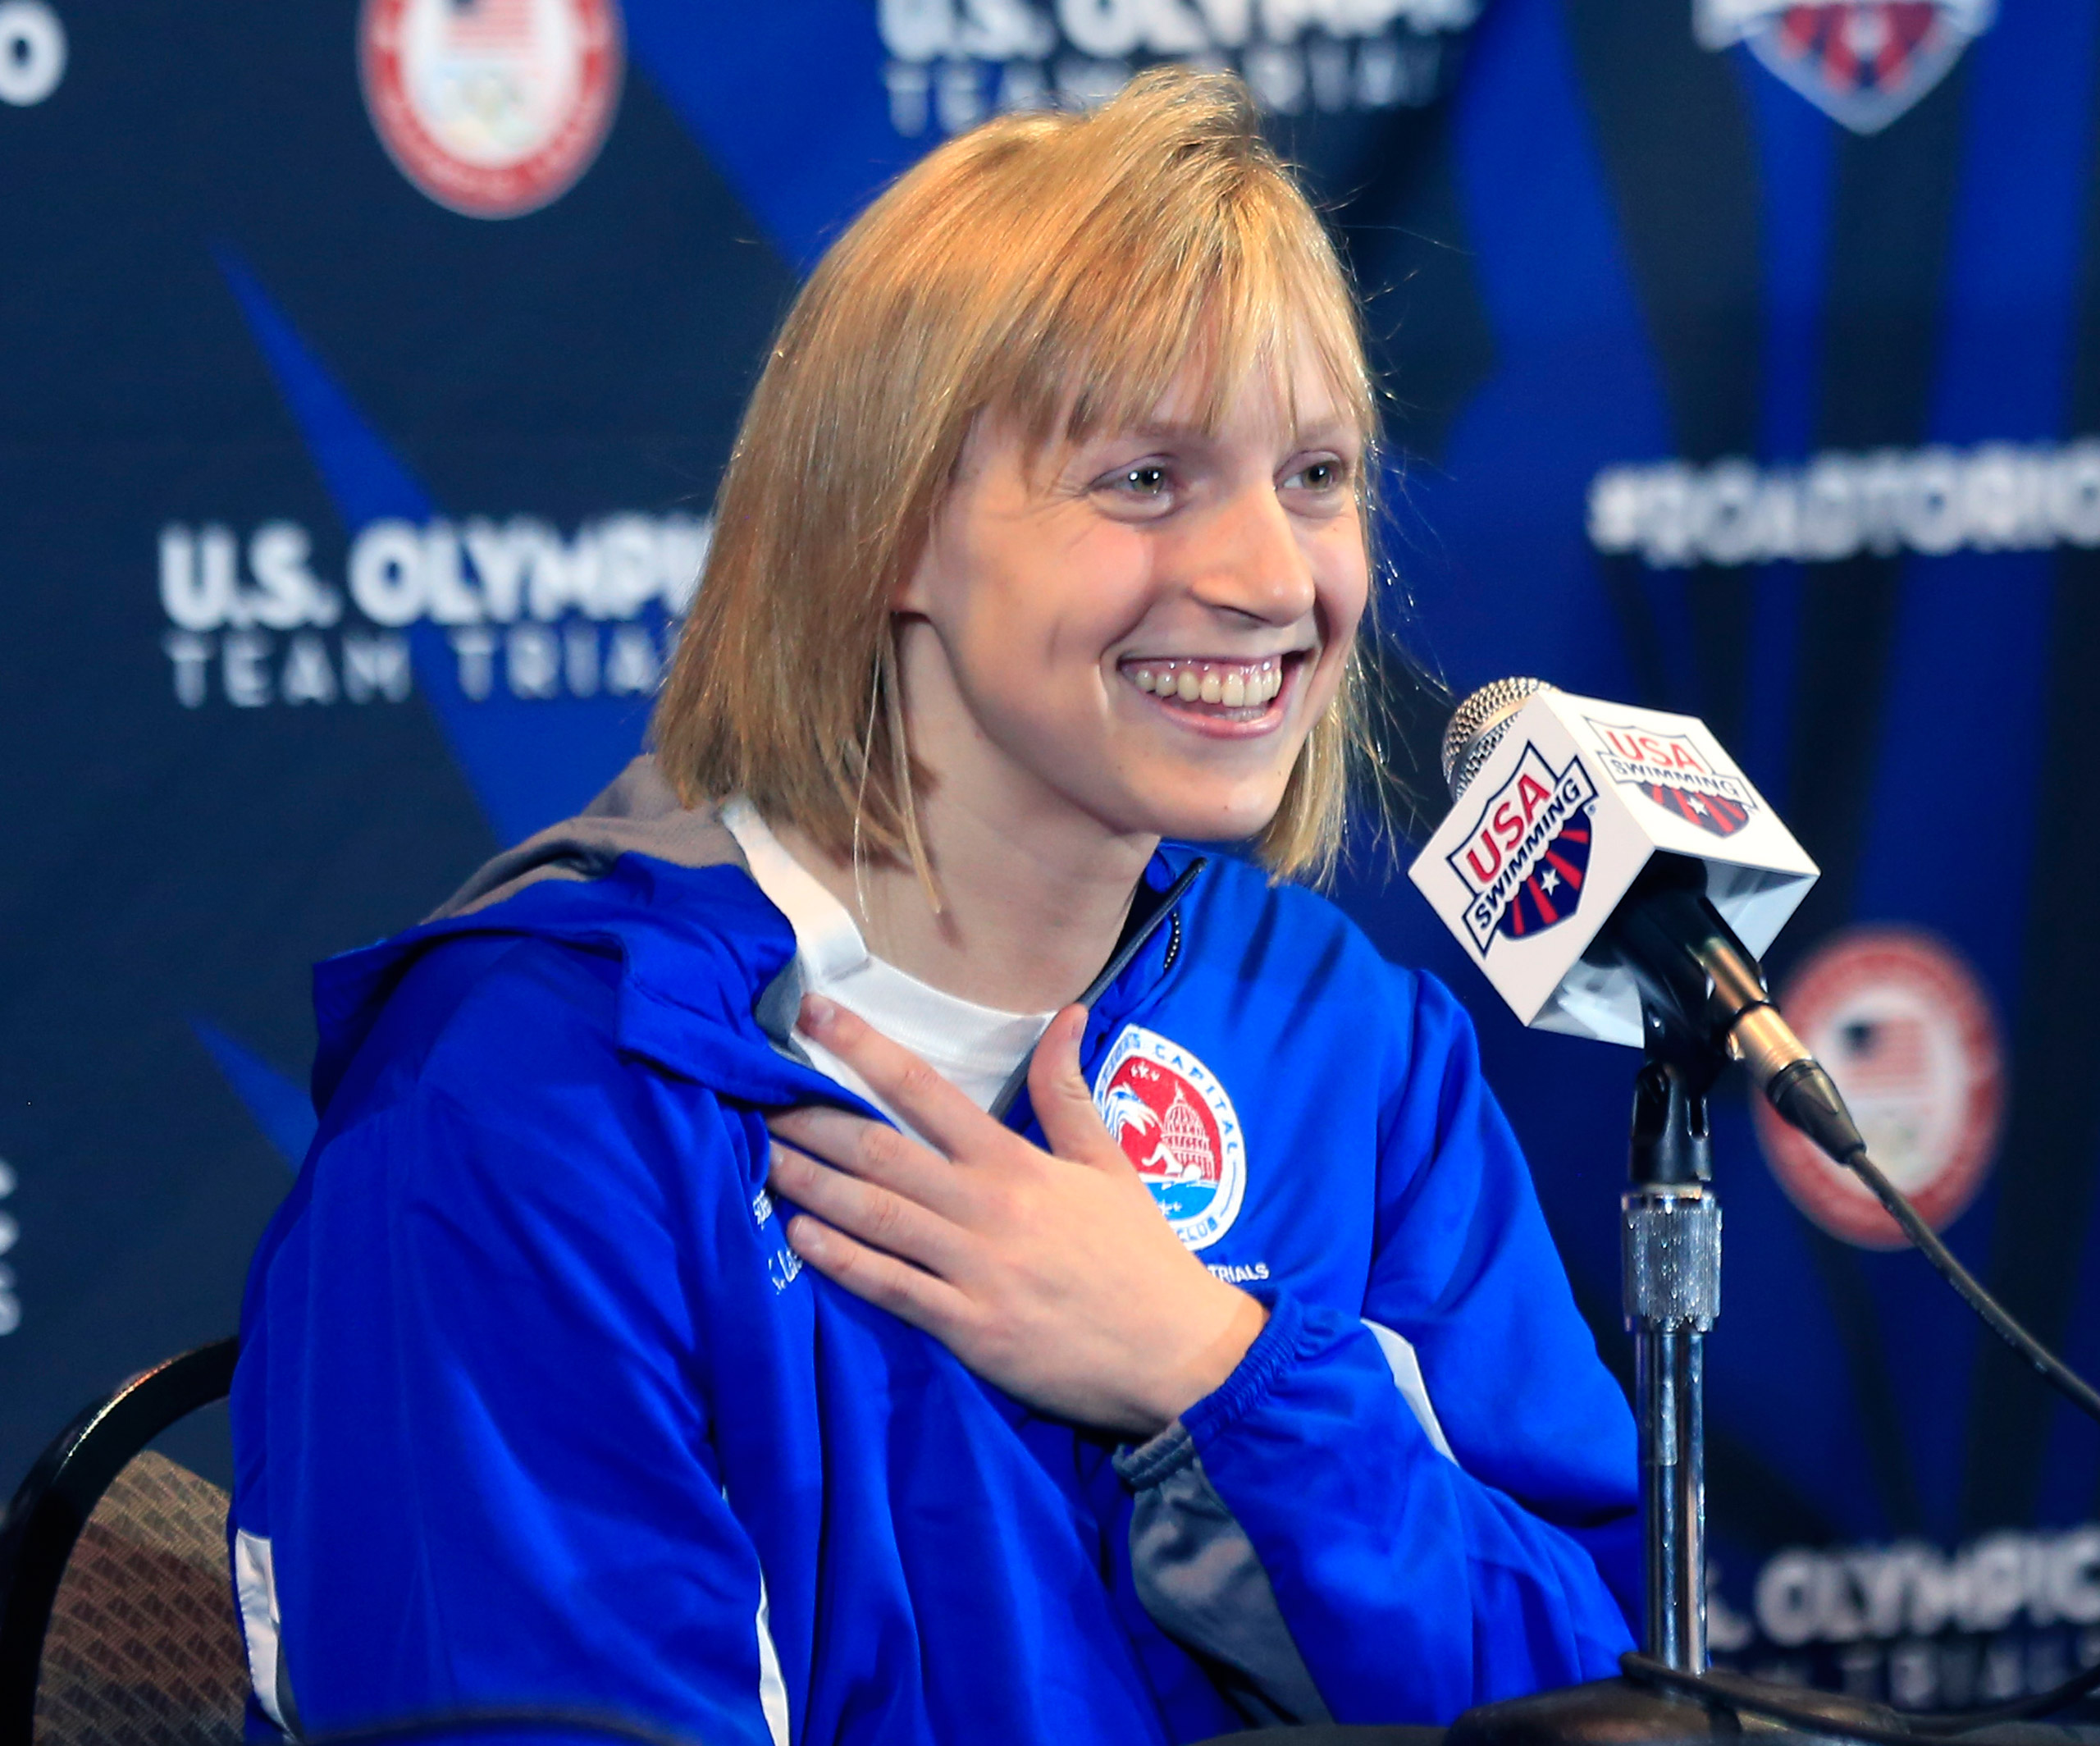 Olympic gold medalist Katie Ledecky speaks during a news conference at U.S. Olympic team trials in Omaha, Neb. on June 24, 2016. (Orlin Wagner—AP)